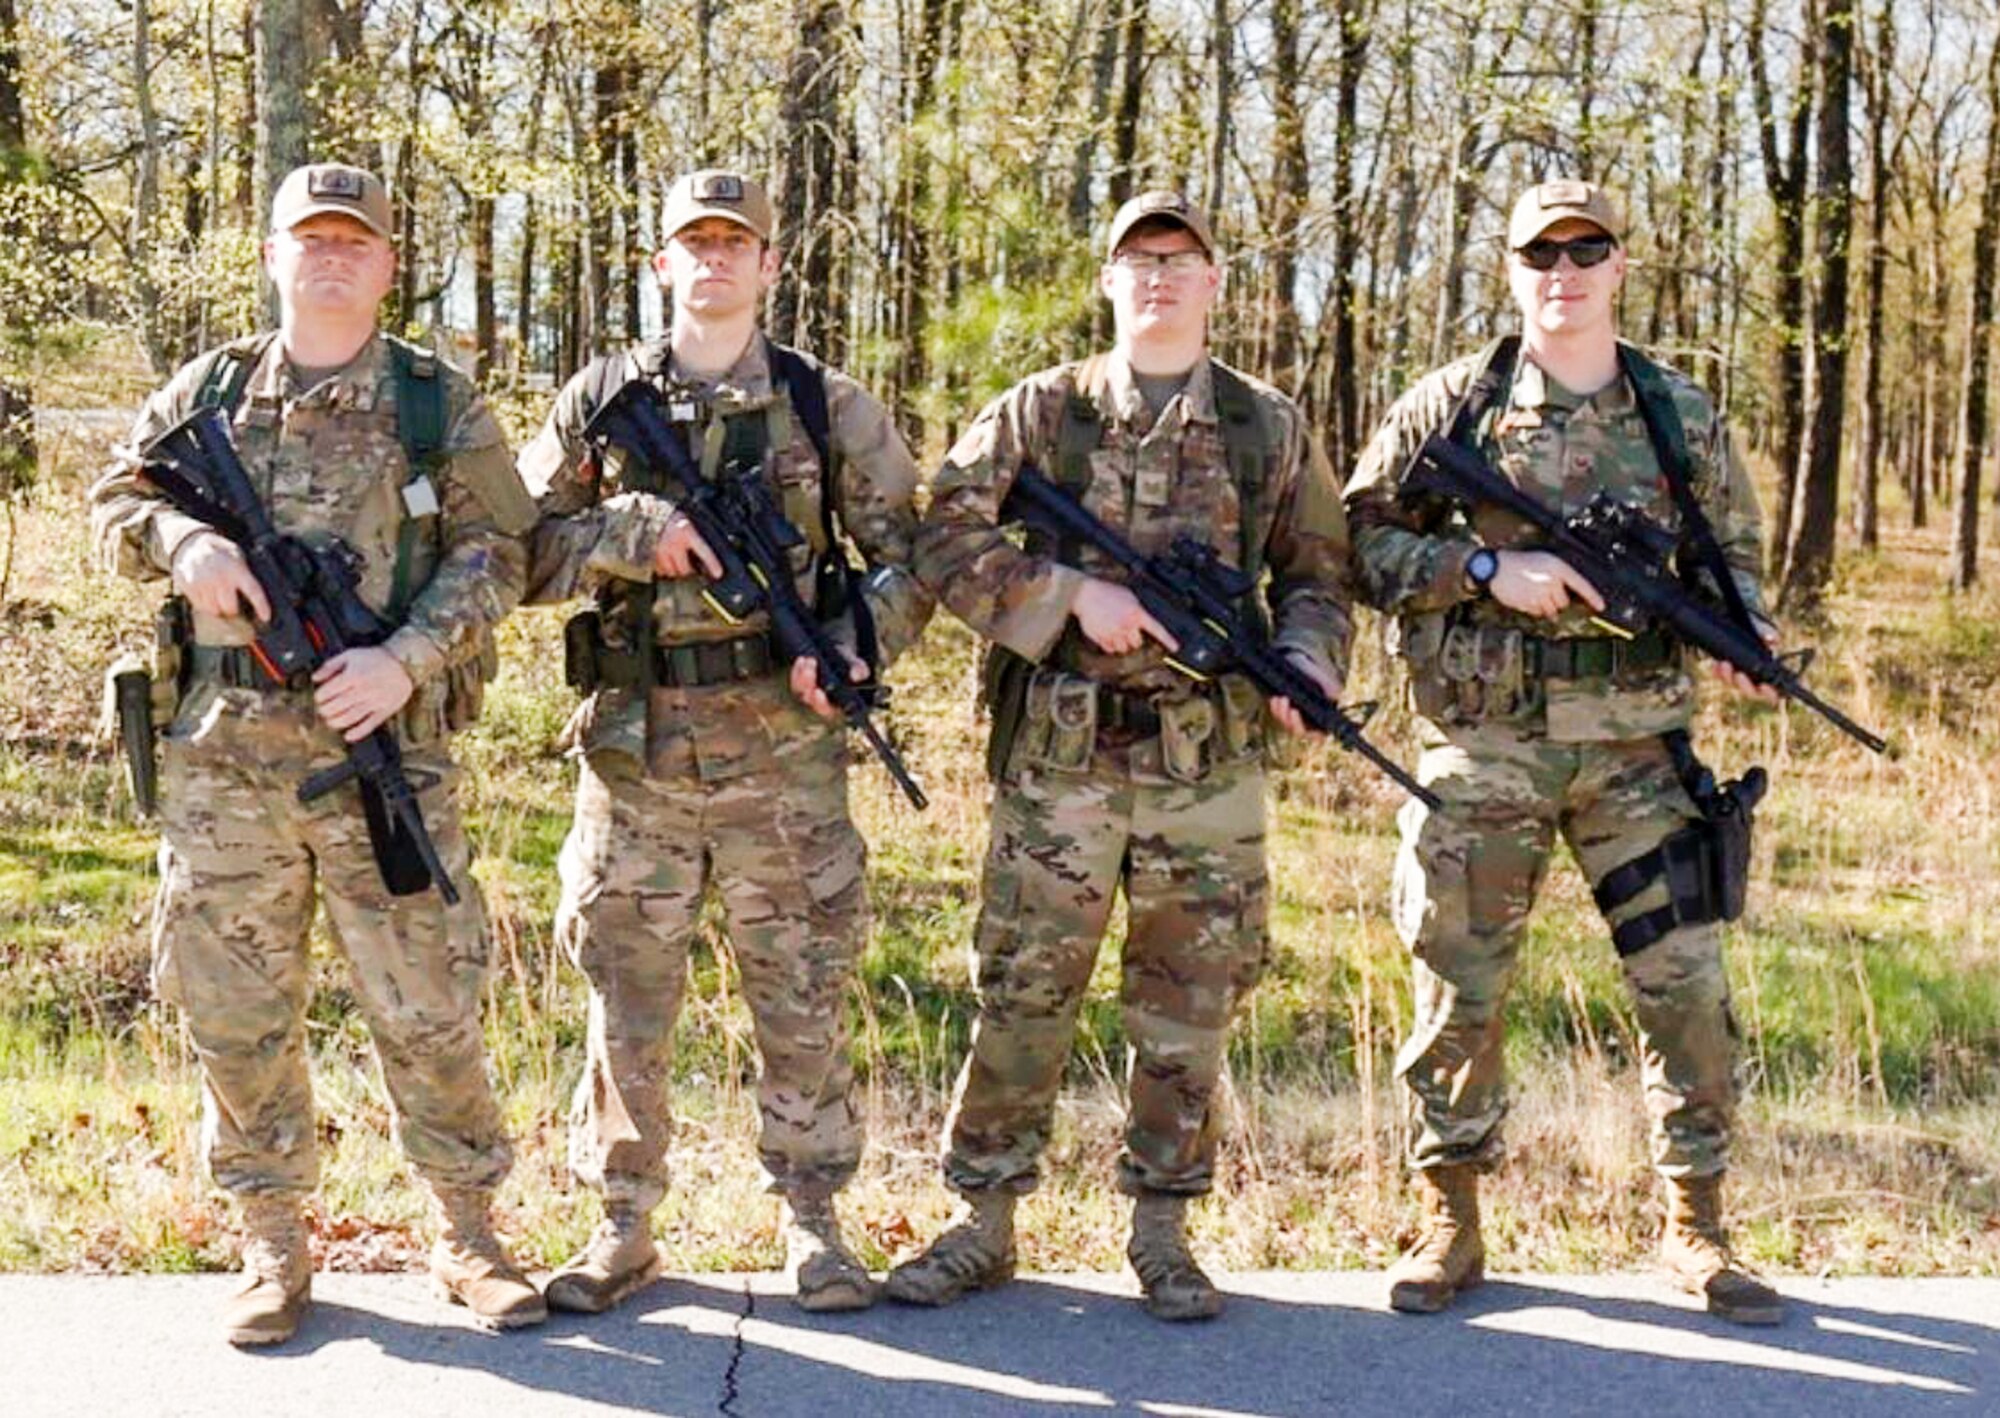 The Western Air Defense Sector marksmanship team poses for a team picture during the 2019 Winston P. Wilson Championship, Robinson Maneuver Training Center, Arkansas, April 10, 2019.  Pictured from left to right: Master Sgt. Eric Poe, 225th Support Squadron; Master Sgt. Shay Brockman, 225th Air Defense Squadron; Tech. Sgt. Cameron Riedl, 225th ADS; and Staff Sgt. Shane Key, 225th SS.  (Courtesy photo by Staff Sgt. Shane Key)